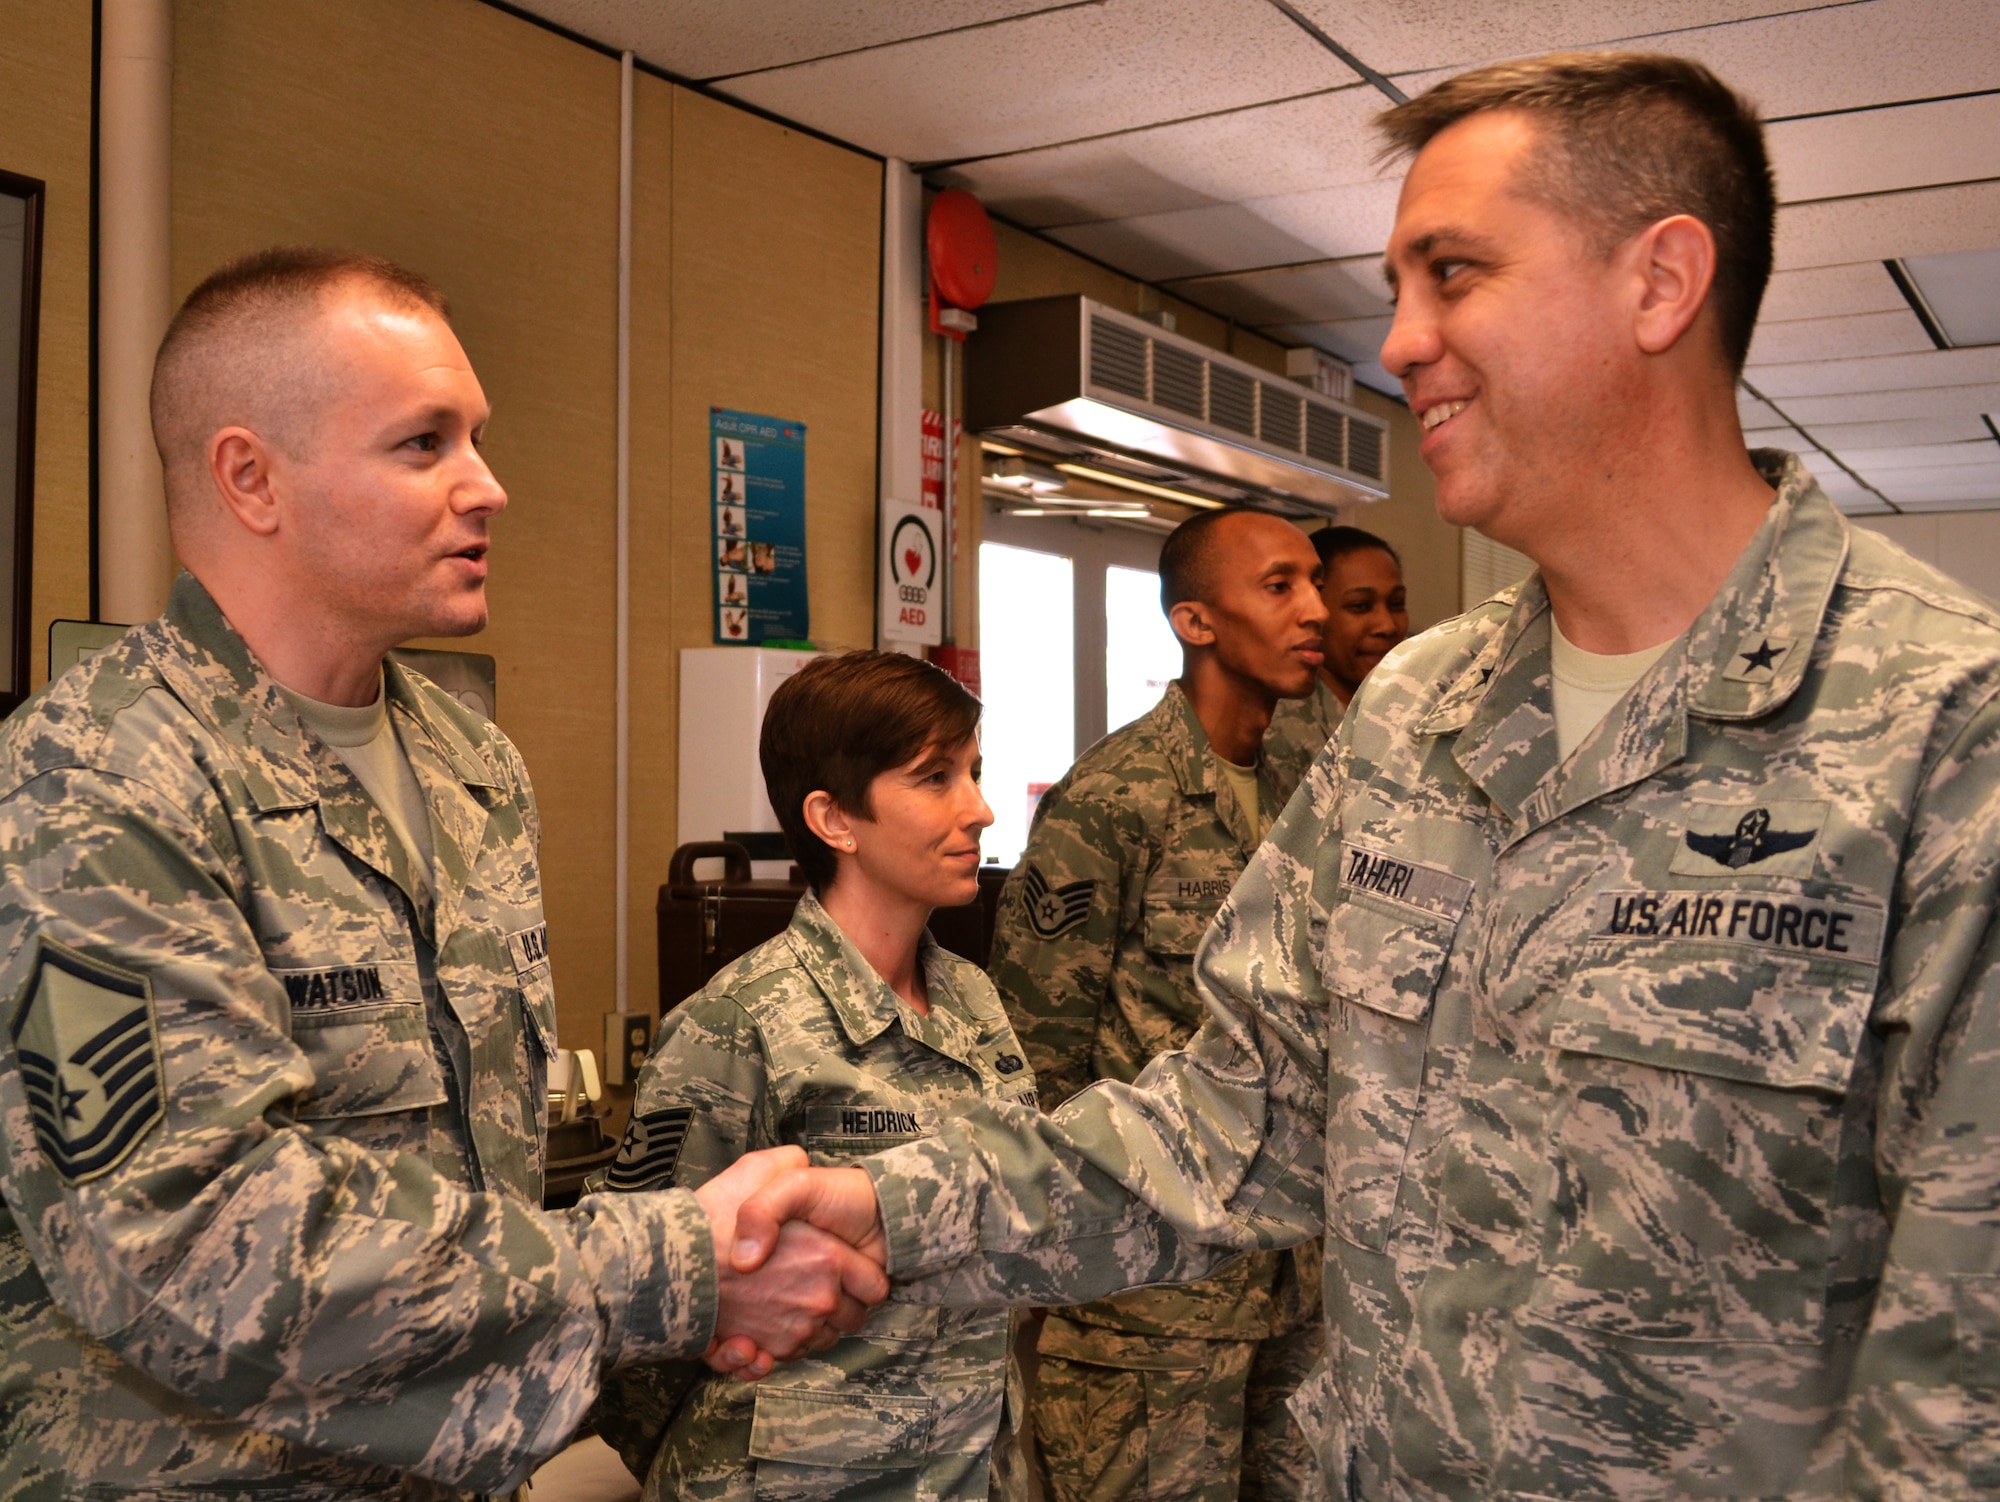 Brig. Gen. Michael R. Taheri, the Commander of the Air National Guard Readiness Center, Joint Base Andrews, Maryland, coins members of the 111th Force Support Squadron in the dining facility at Horsham Air Guard Station, Pa., March 12, 2016. Most of Taheri’s visit was spent talking with the Guardsmen here and recognizing their service by presenting coins to exceptional members. (U.S. Air National Guard photo by Tech. Sgt. Andria Allmond)